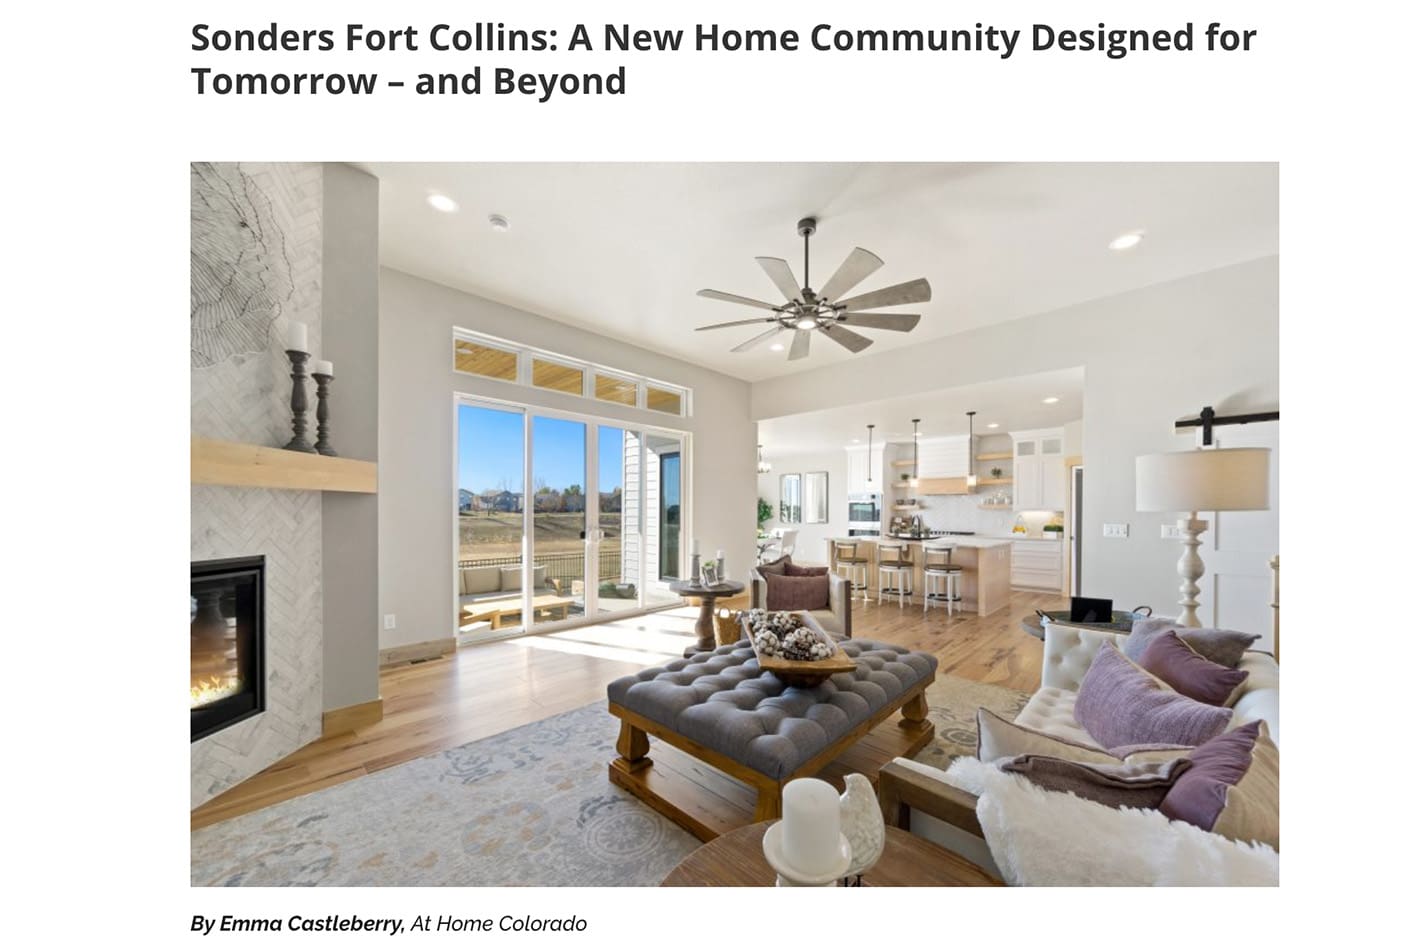 Sonders Fort Collins featured in March 3 edition of AtHome Colorado